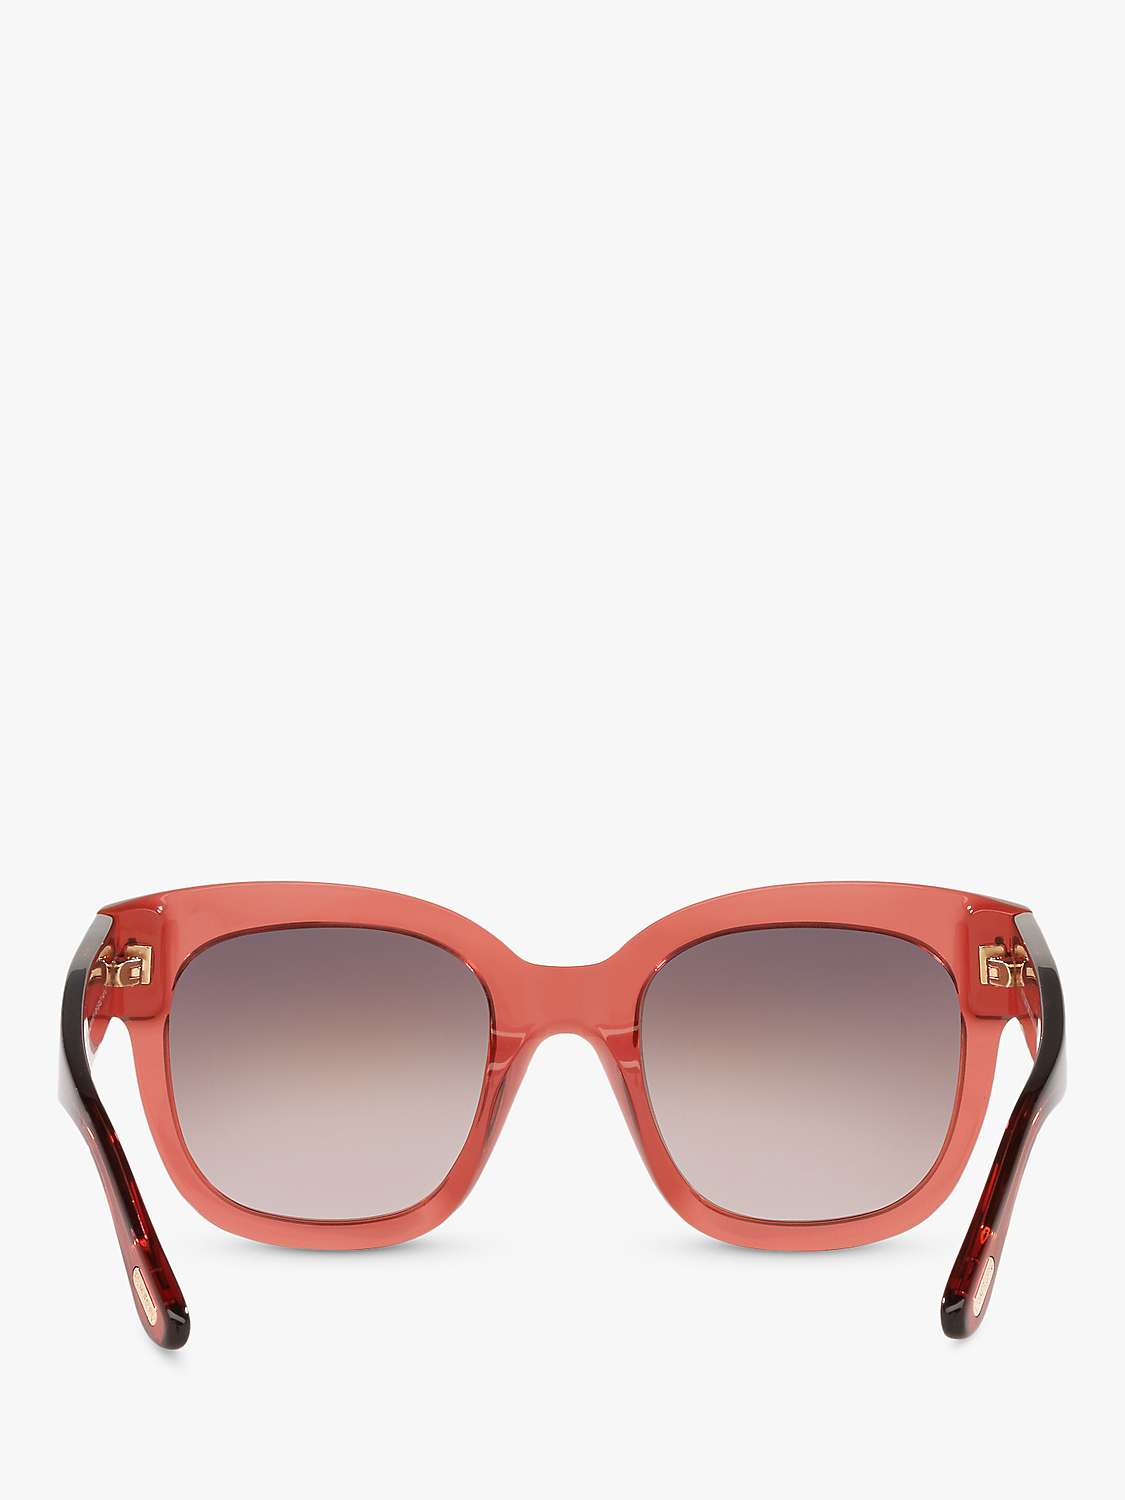 Buy TOM FORD 0TR001298 Women's Square Sunglasses, Pink Shiny Online at johnlewis.com